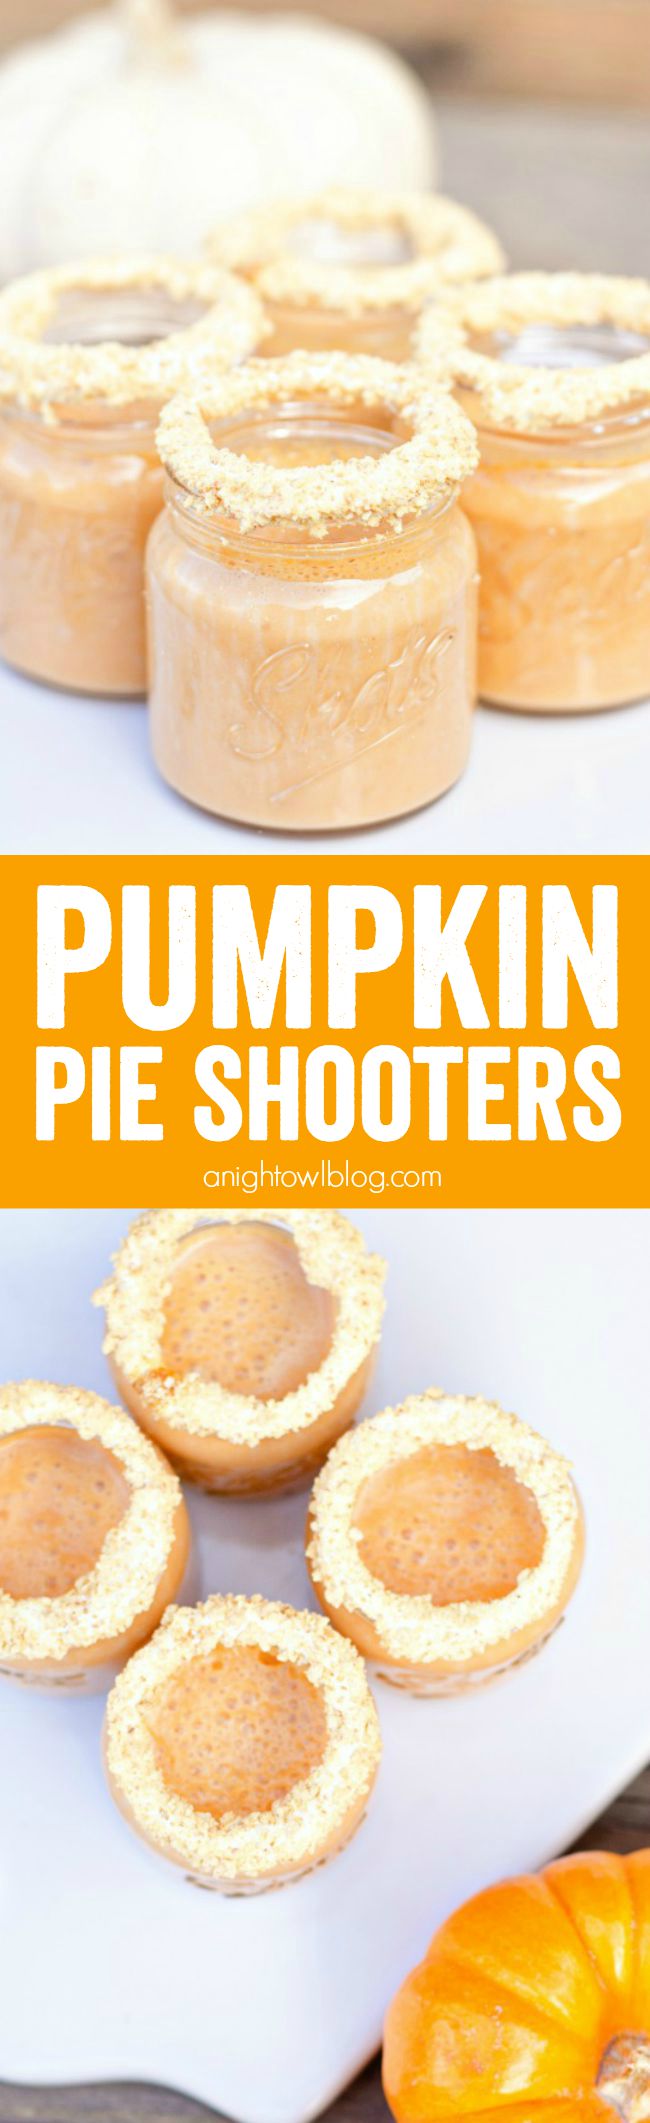 Add a little fun to your Fall! These Pumpkin Pie Shooters are delicious and can be made with or without alcohol!